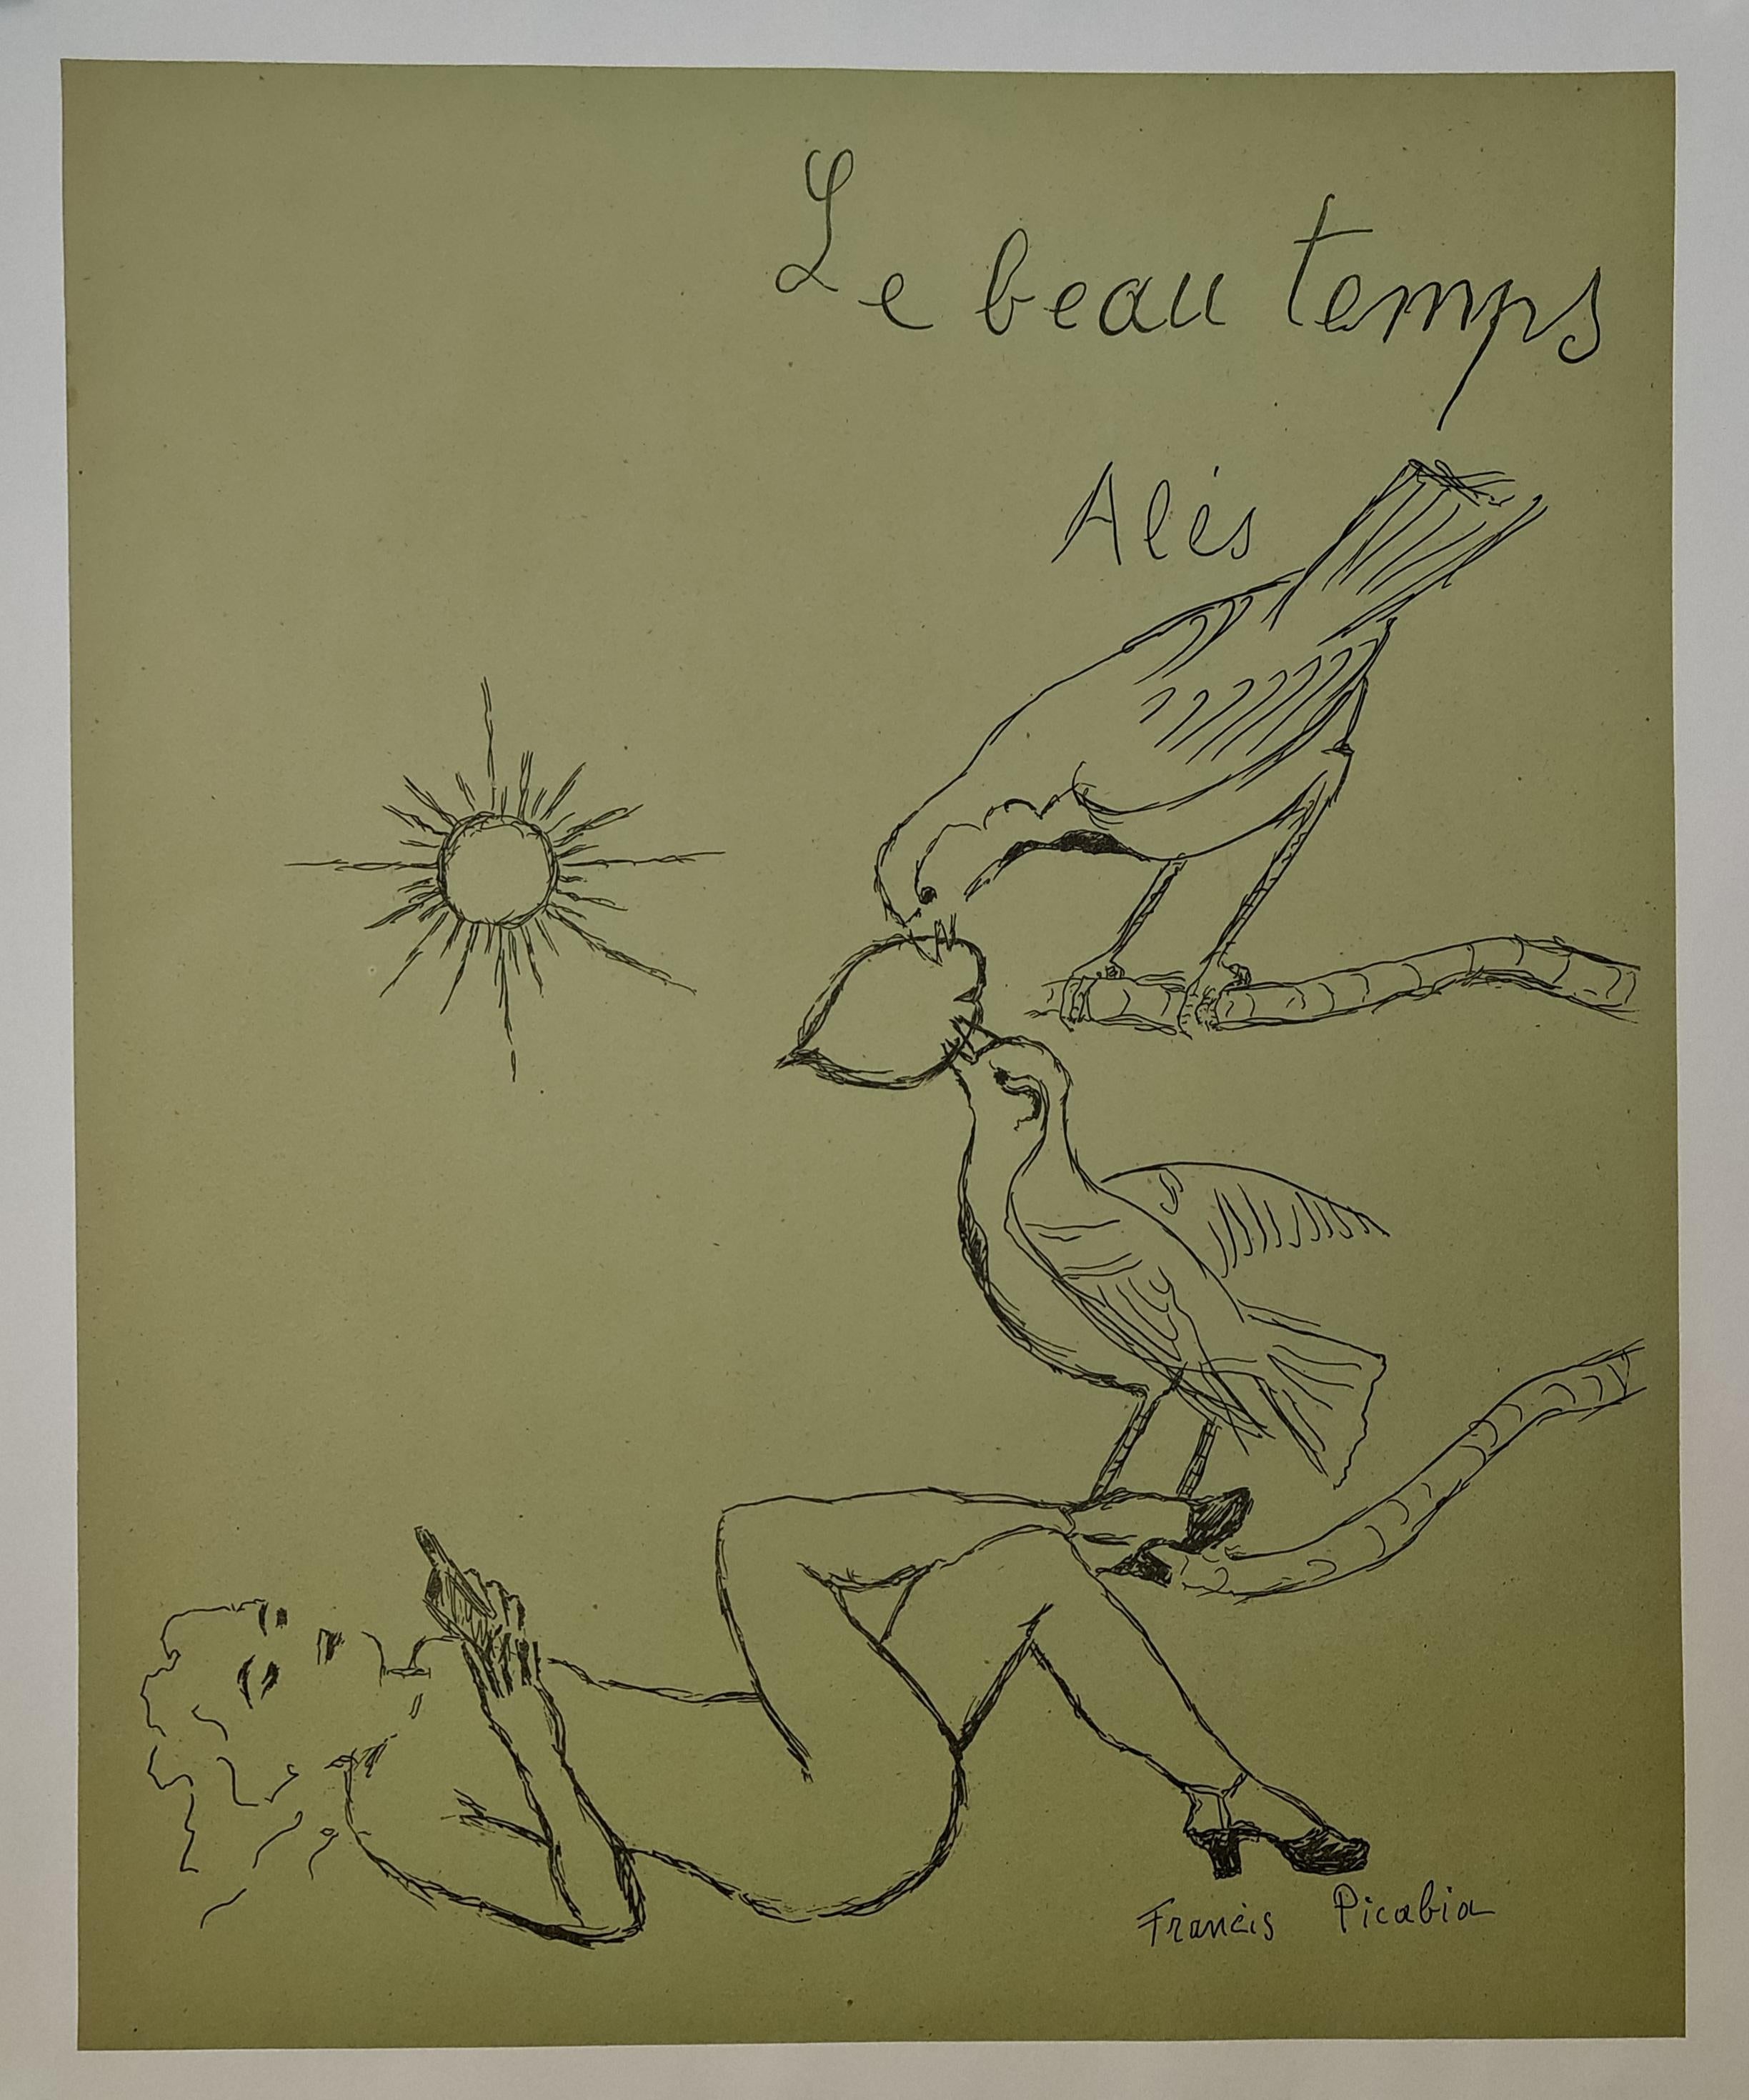 Poster printed in lithography after a drawing by Francis Picabia, designed for the opening in May 1950 of the bookstore (owned by Pierre-André Benoît) Le Beau Temps in Alès, a French town located in the Gard department, in the Occitanie